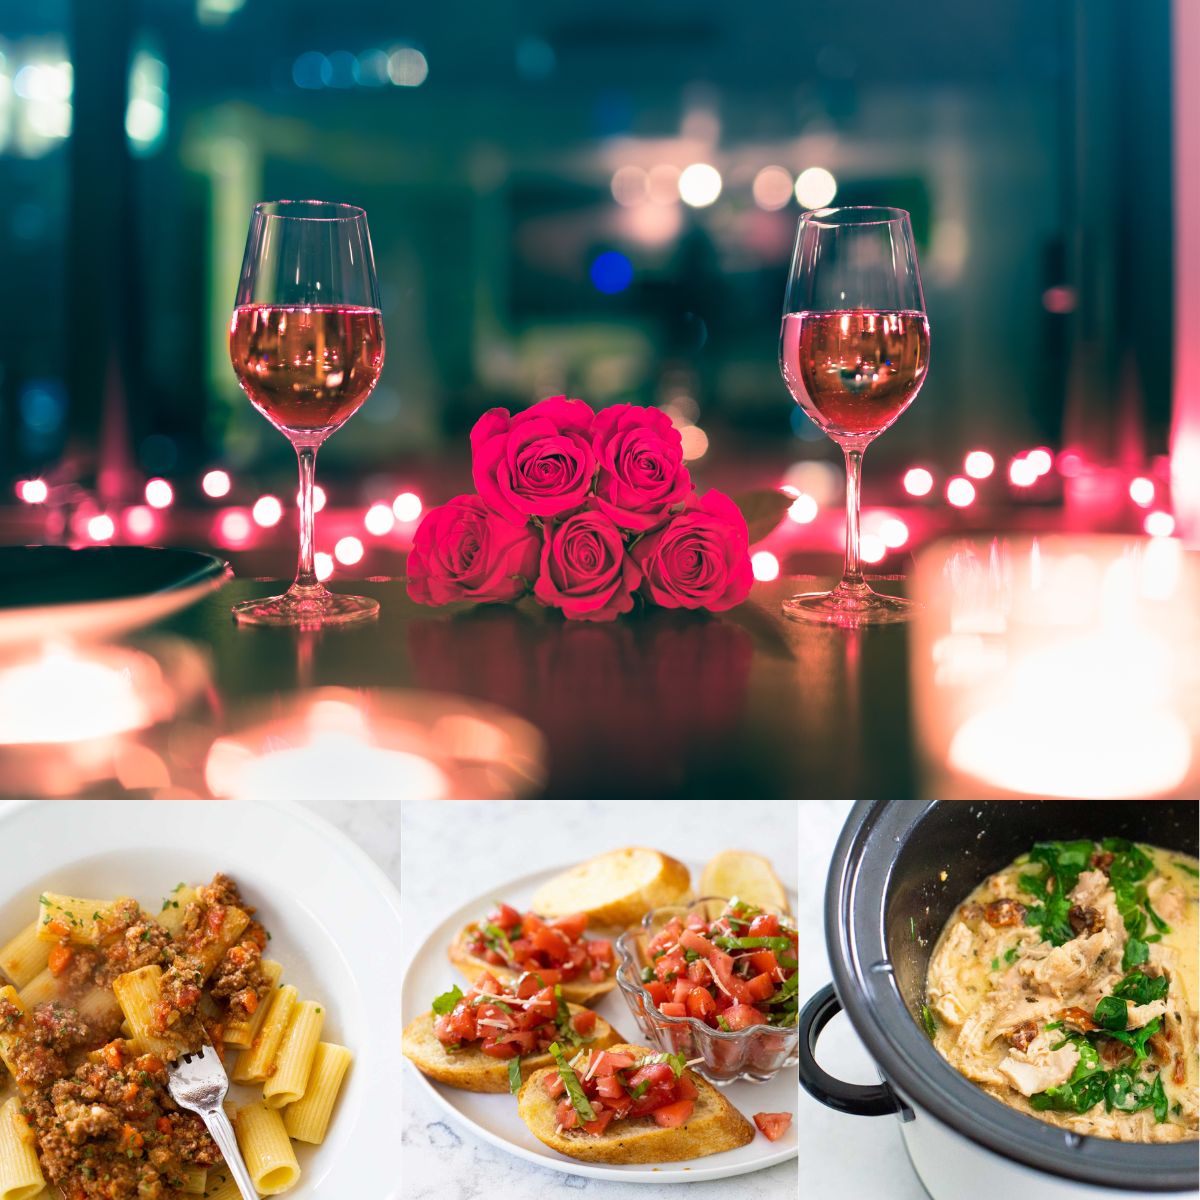 A table for two is set with roses and wine. a collage of 3 pasta recipes is below.